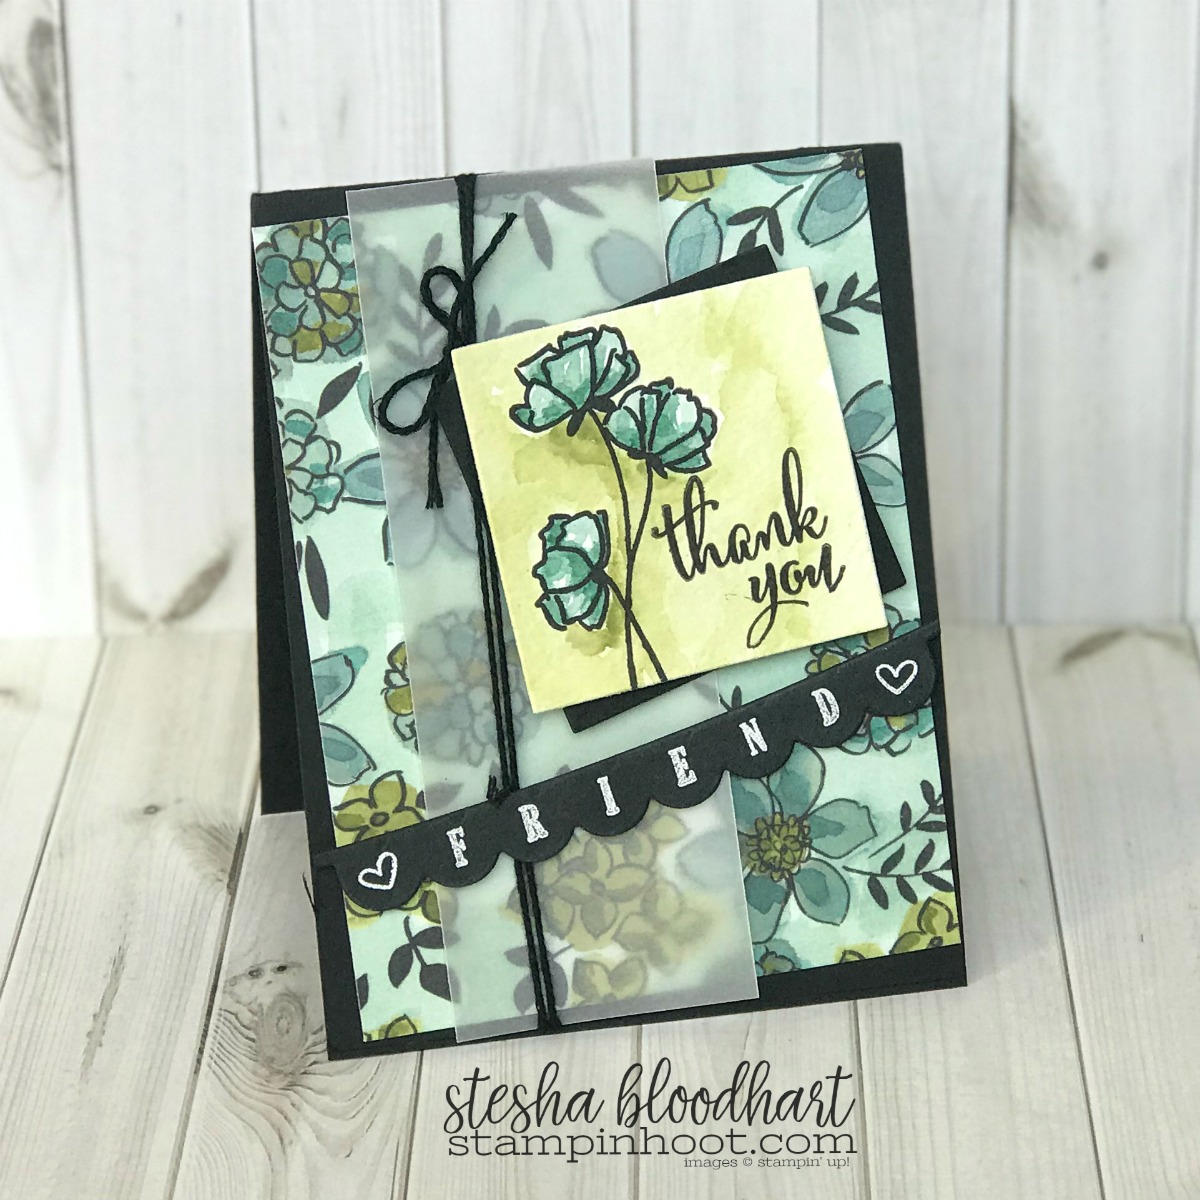 Share What You Love Suite Early Release Available May 1st 2018 Card Created by Stesha Bloodhart, Stampin' Hoot for #OnStage2018 Display Board, Milwaukee WI #steshabloodhart #stampinhoot